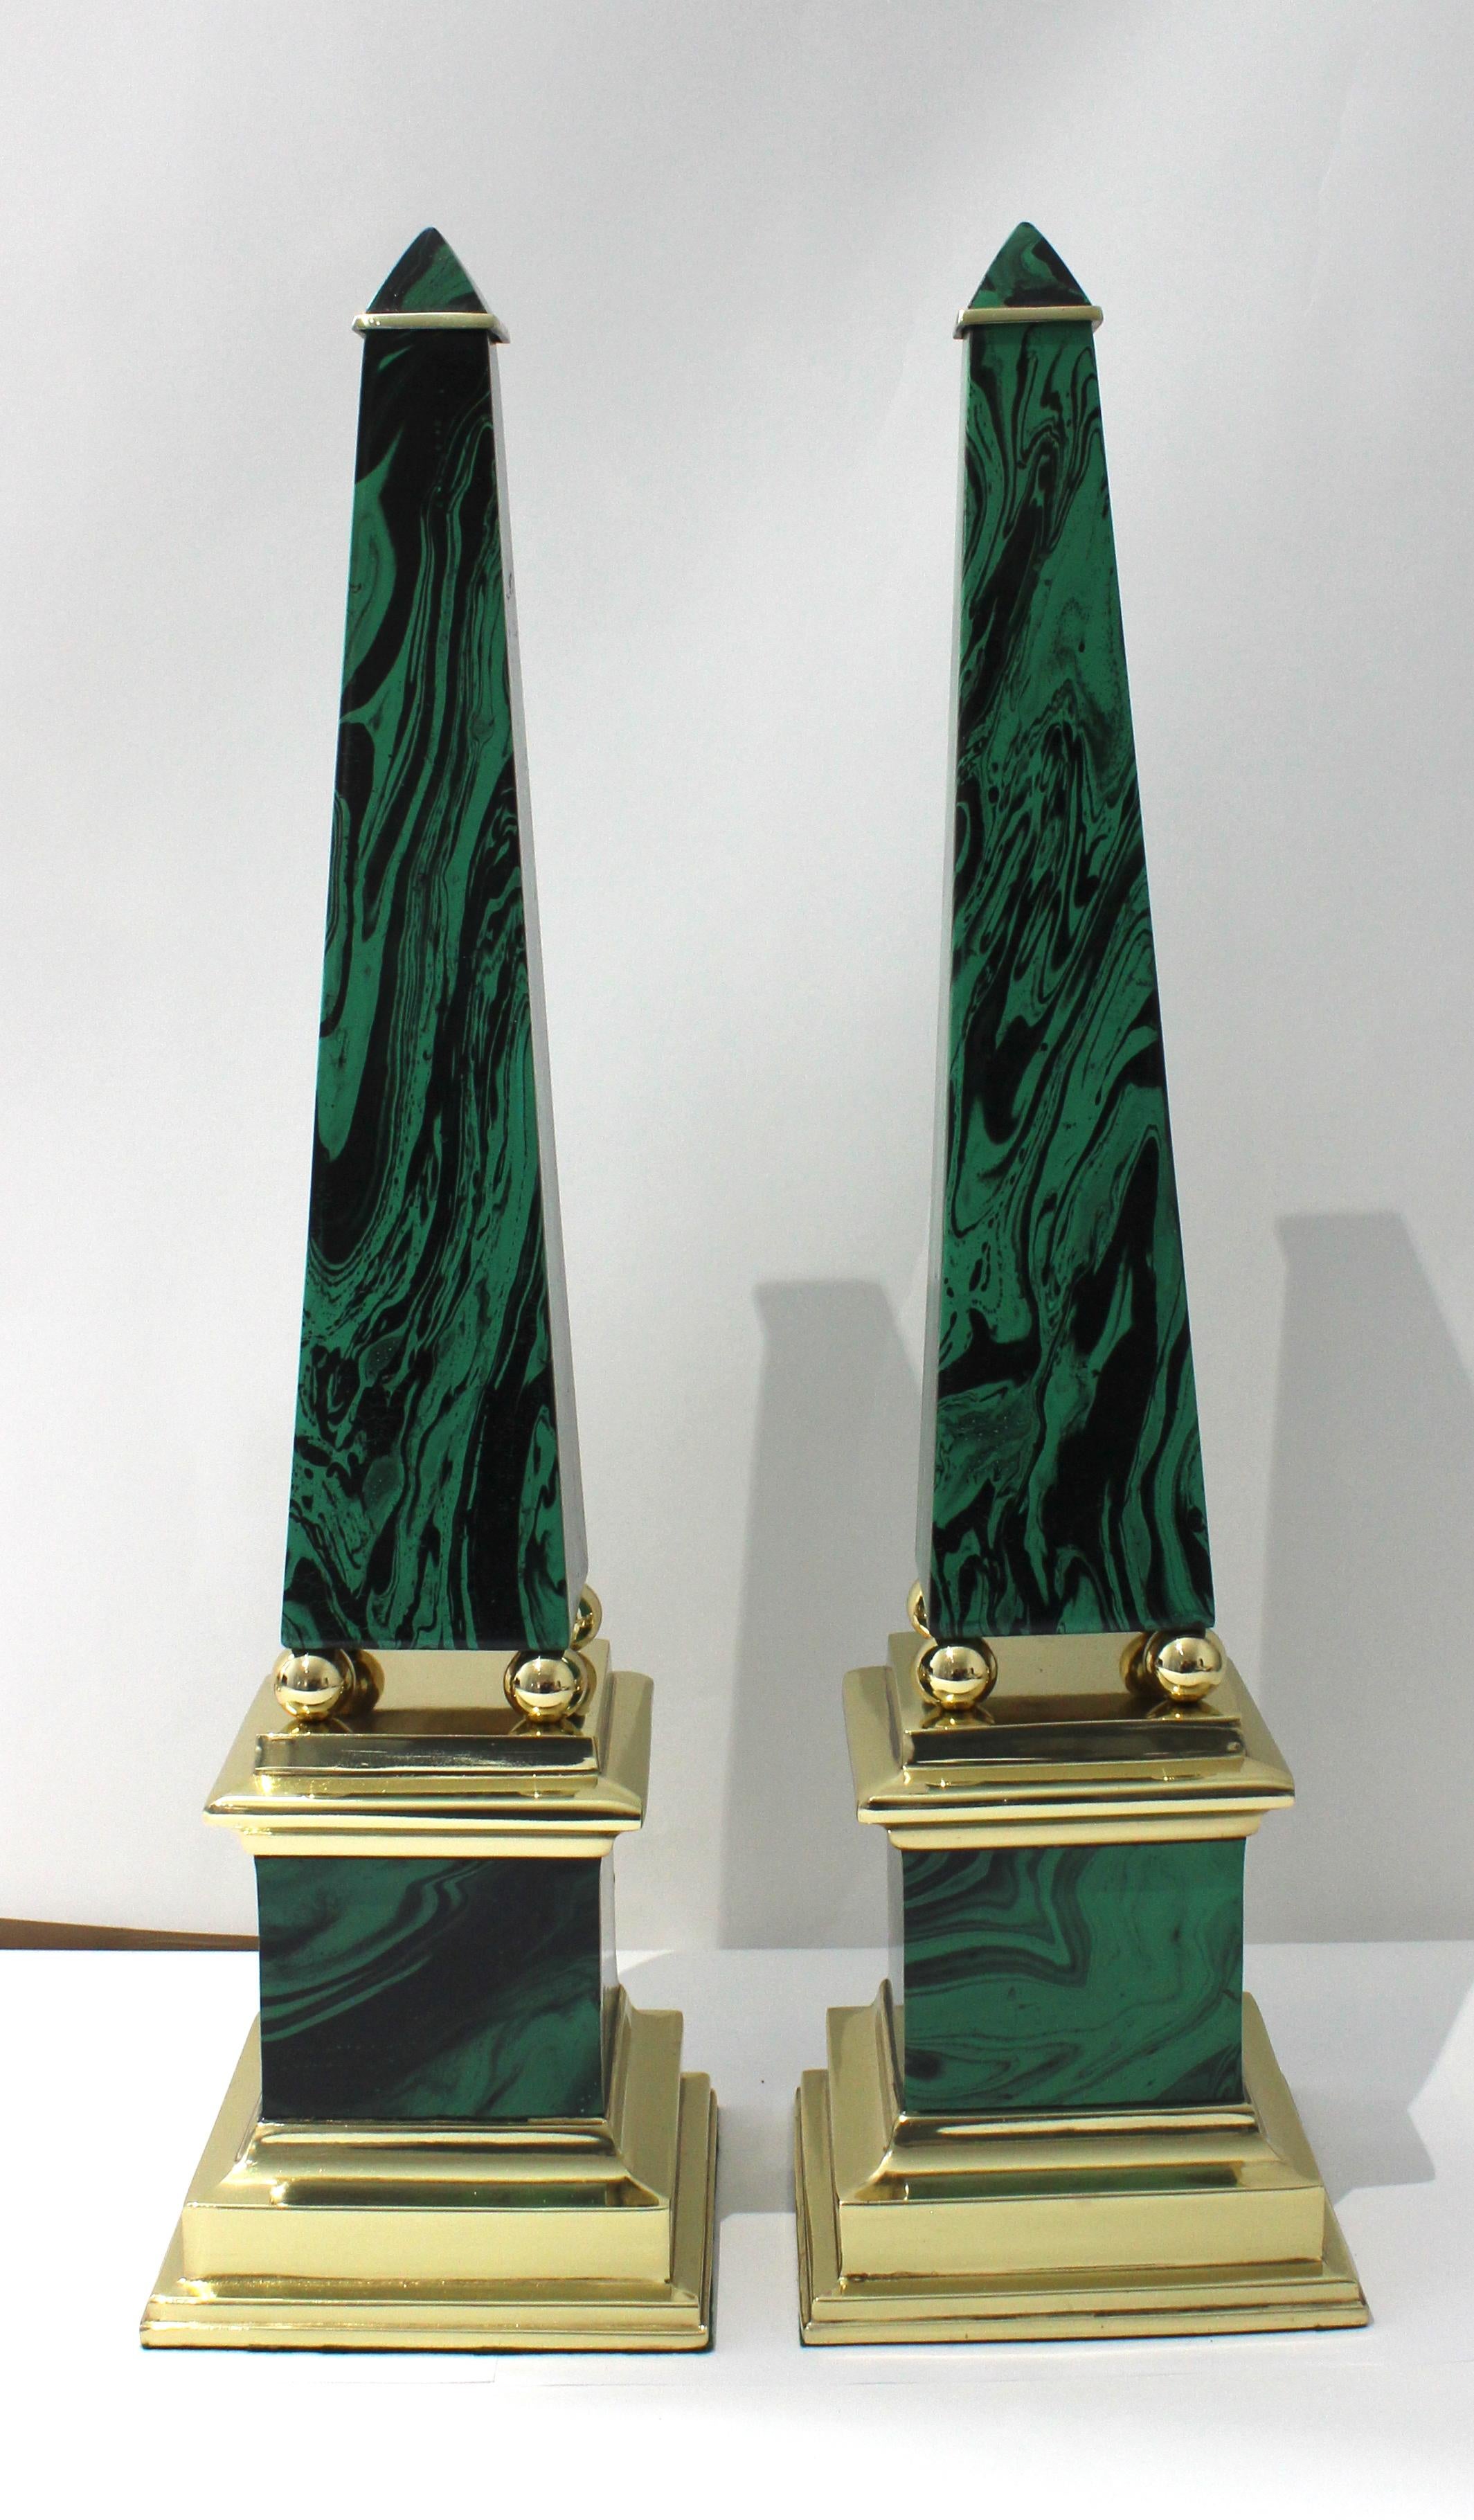 This set of Chapman obelisks are very much in the Egyptian Revival style, and they are fabricated in brass plated steel, with a stylized, faux malachite finish.

Note: The pair of been professionally polished and finished with a clear lacquer, and